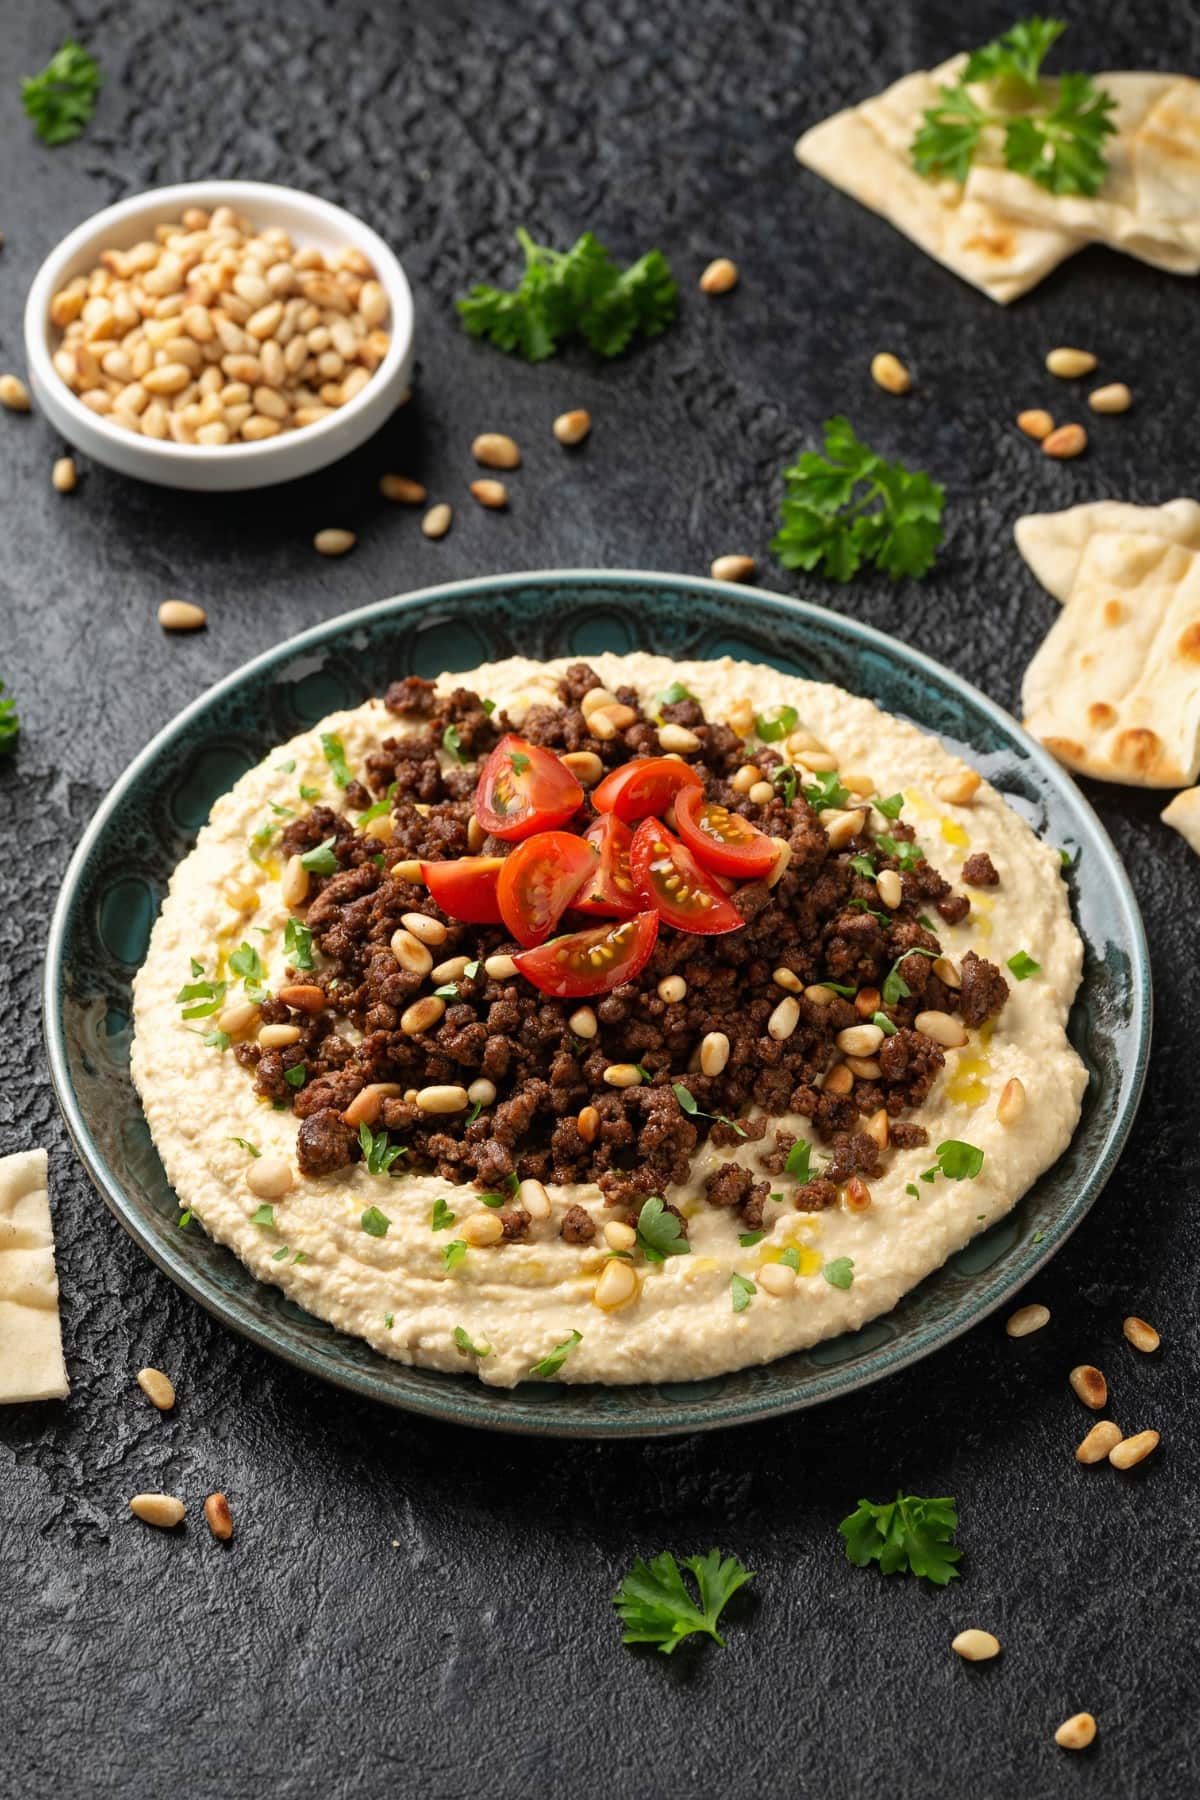 17 Easy Mediterranean Ground Beef Recipes featuring A savory dish of hummus topped with ground beef and veggies, set against a dark backdrop